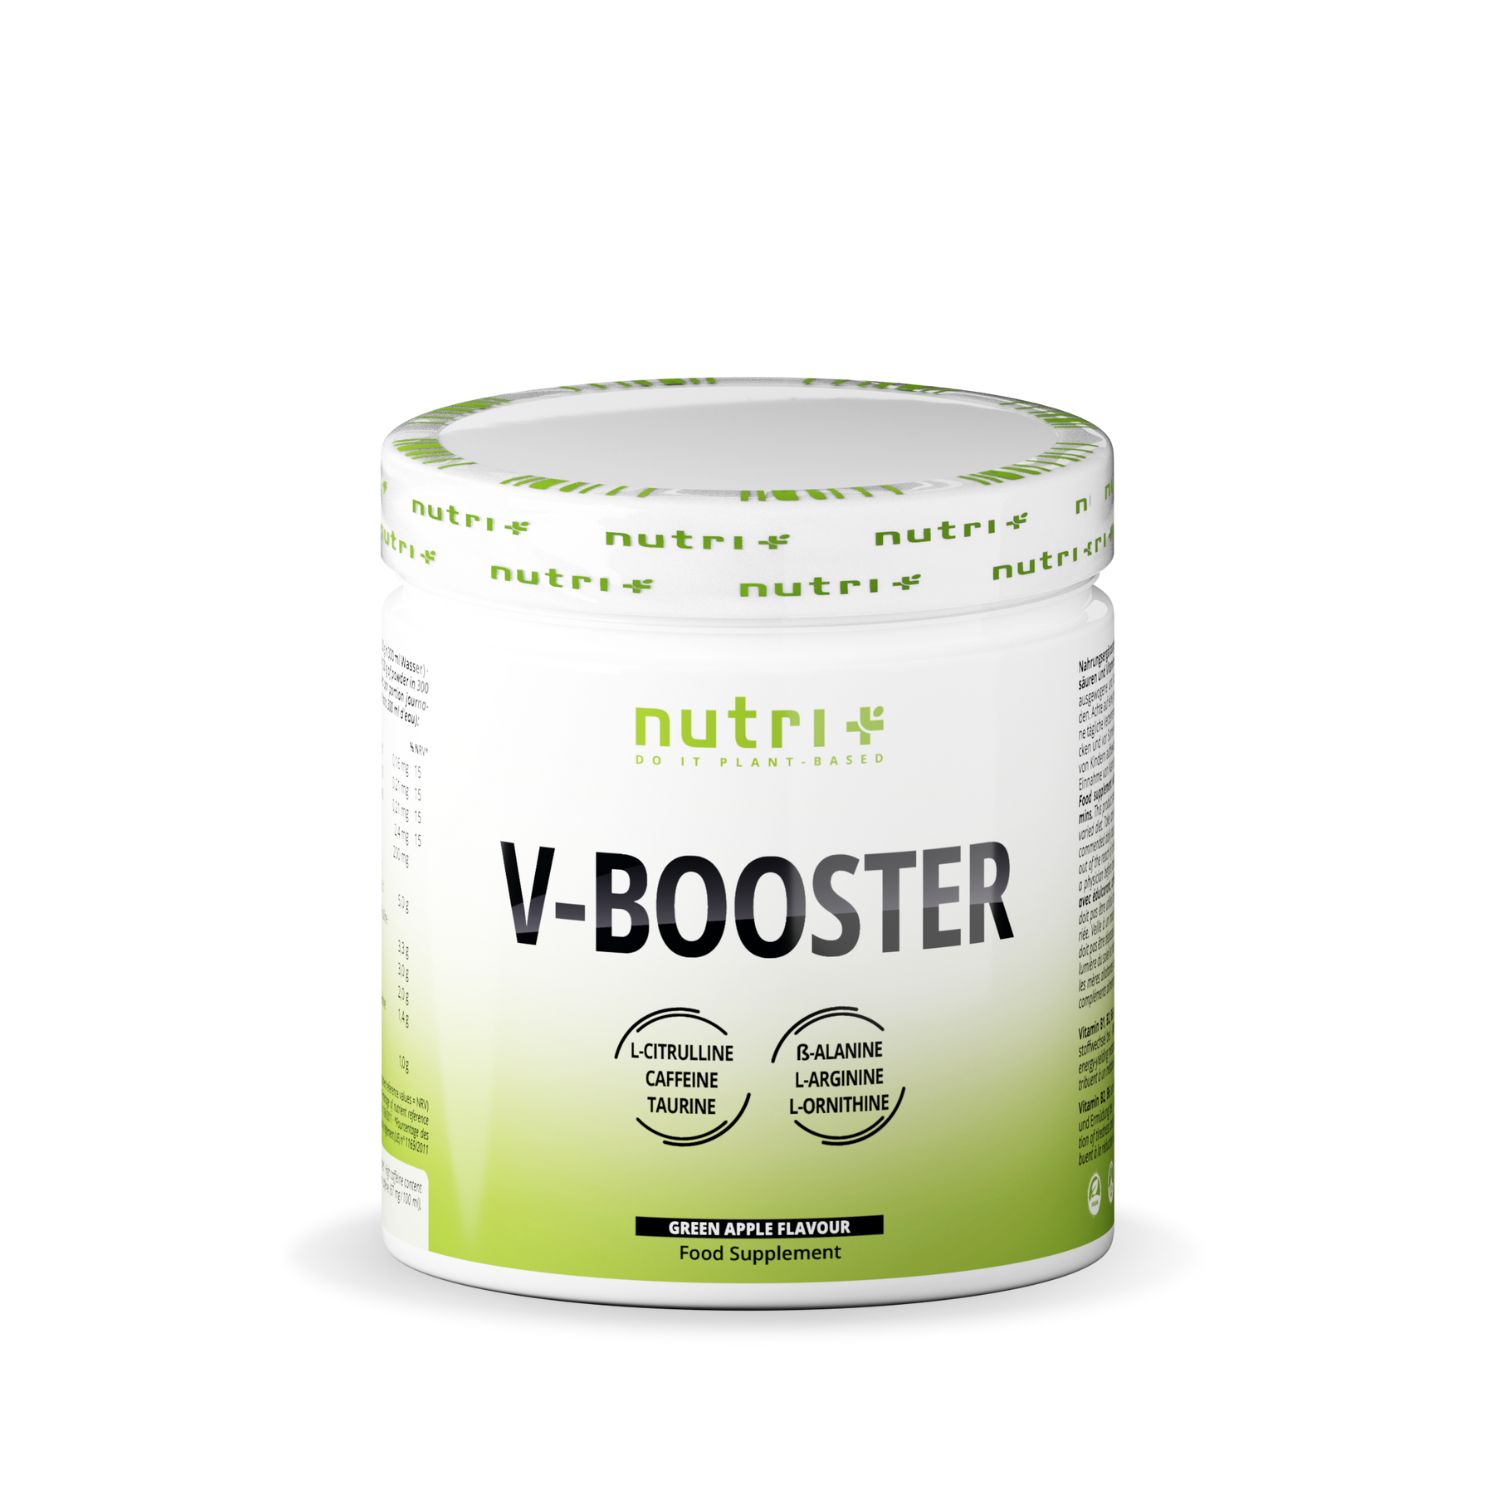 Booster - Pre-Workout Shake